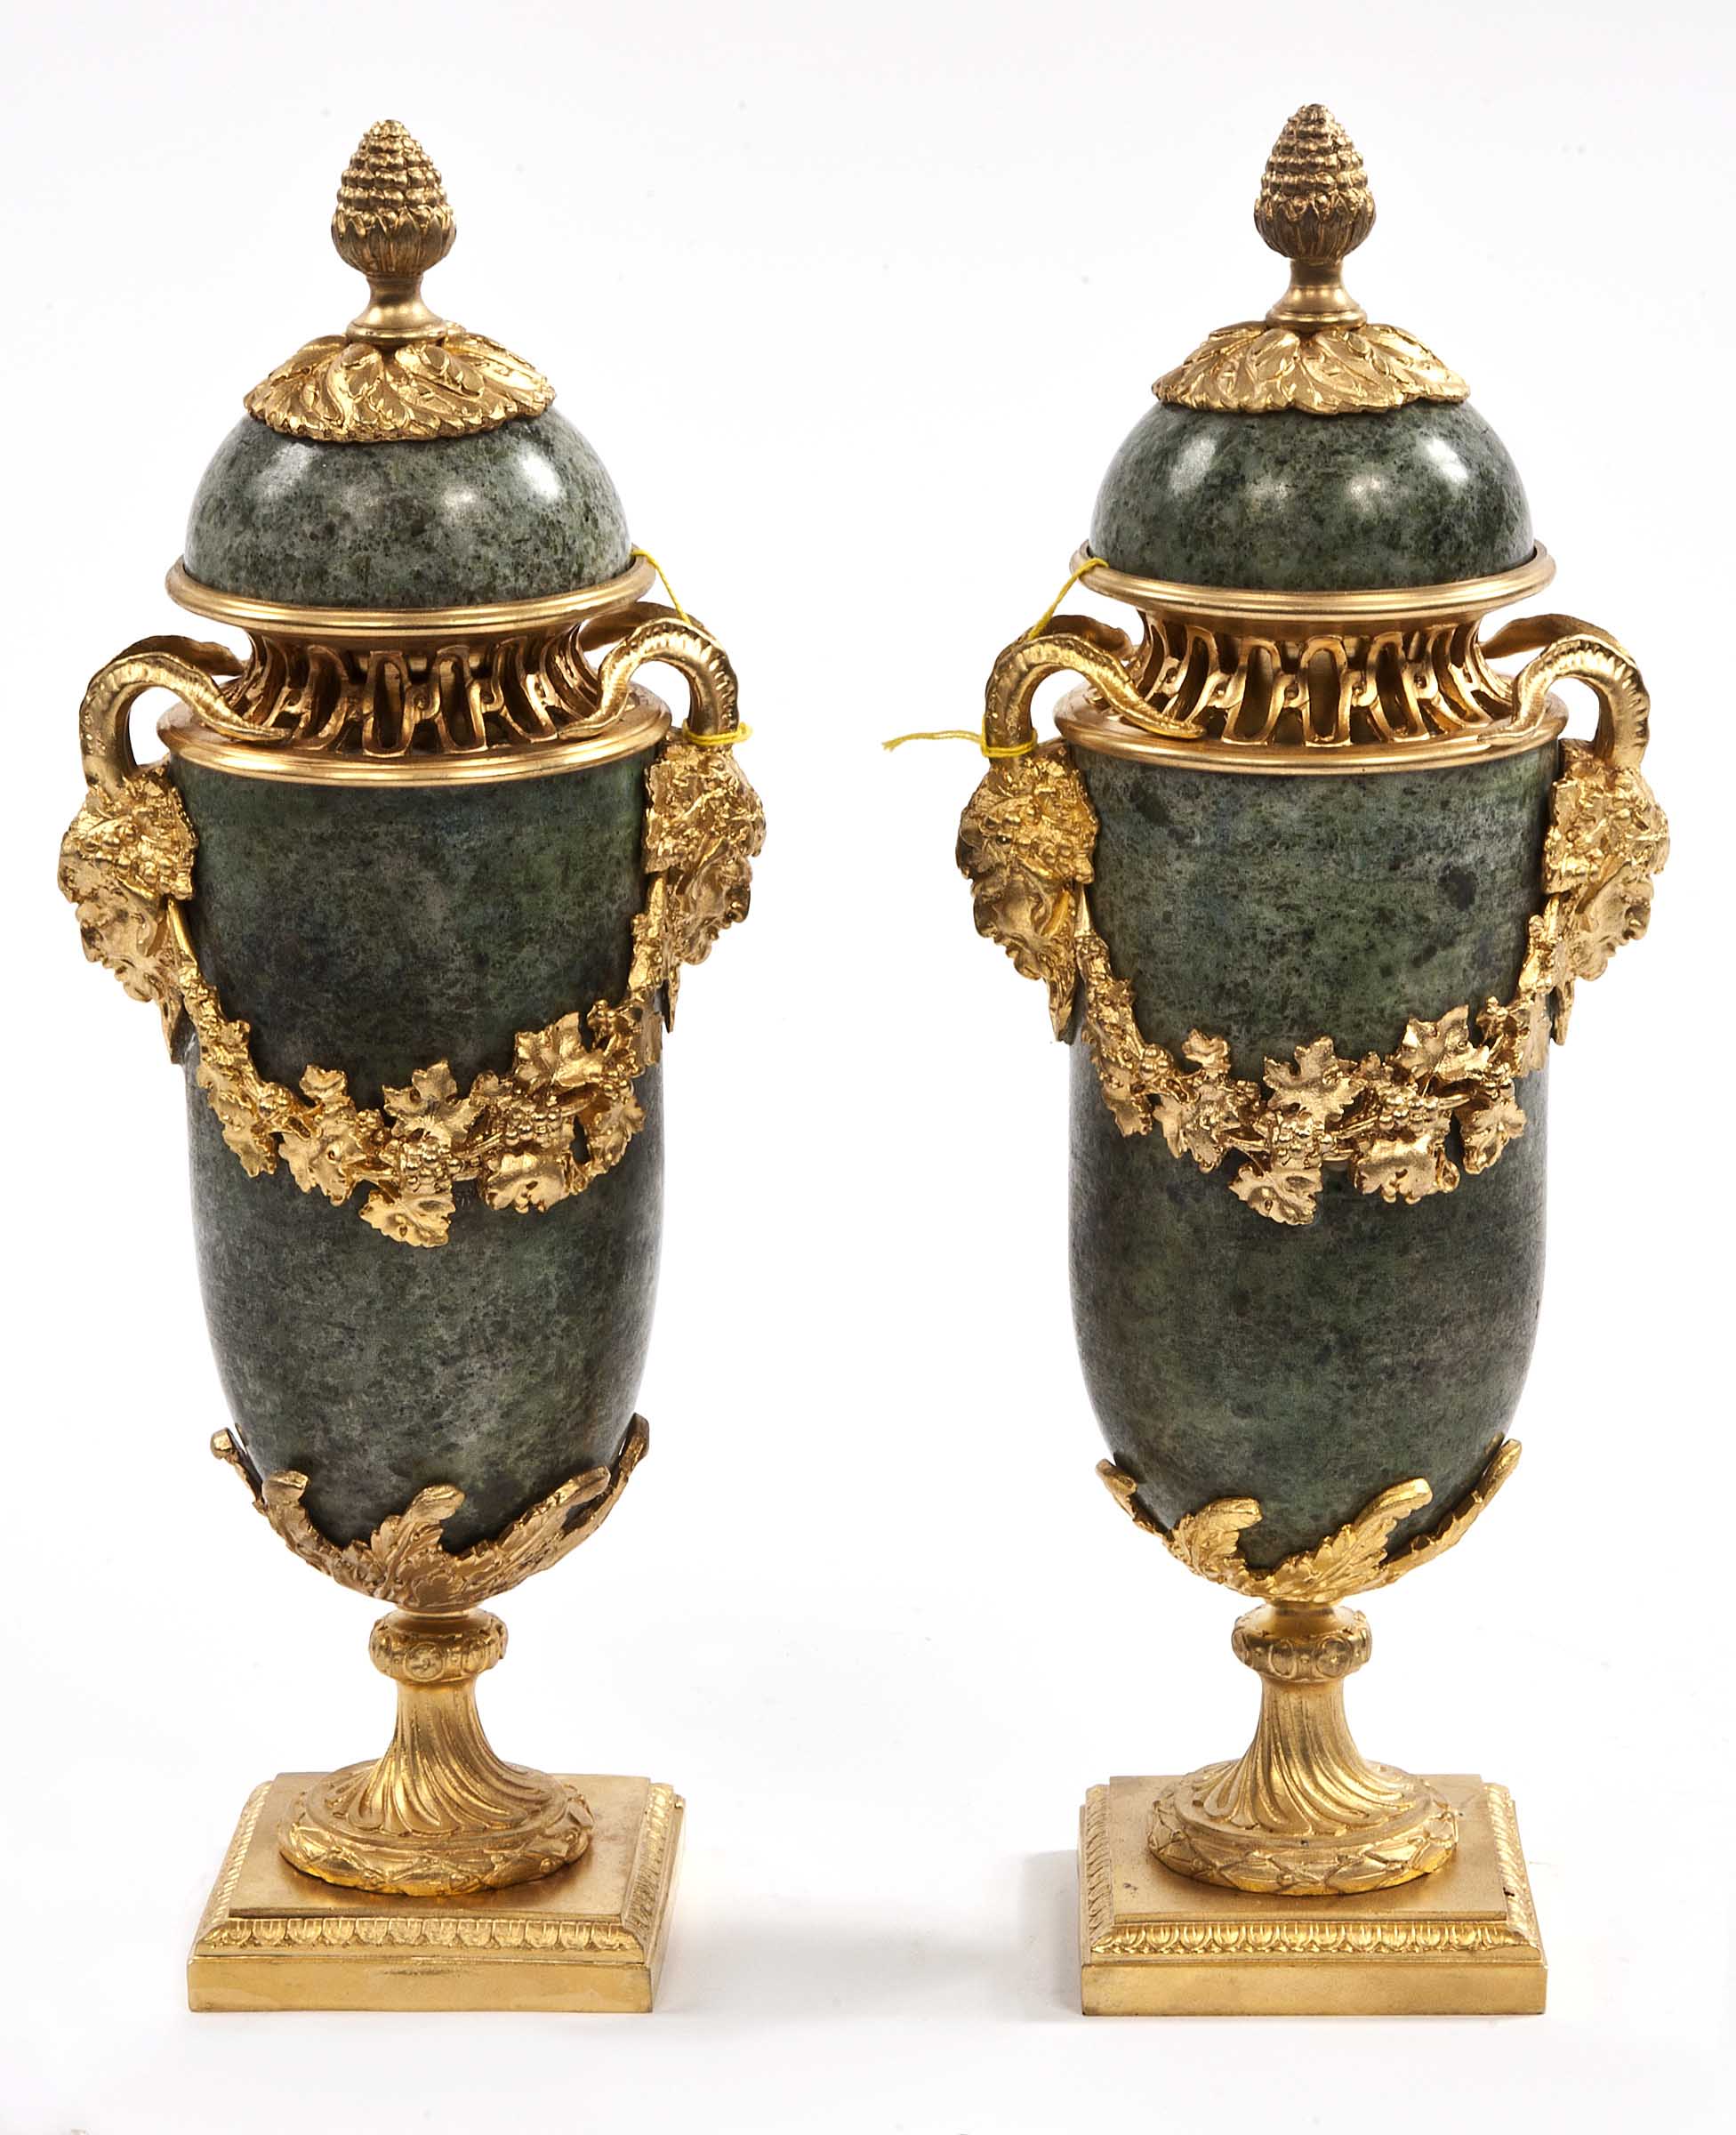 A PAIR OF VERY ATTRACTIVE GREEN MARBLE AND GILT BRASS MANTELPIECE URNS, O.R.M., in the manner of